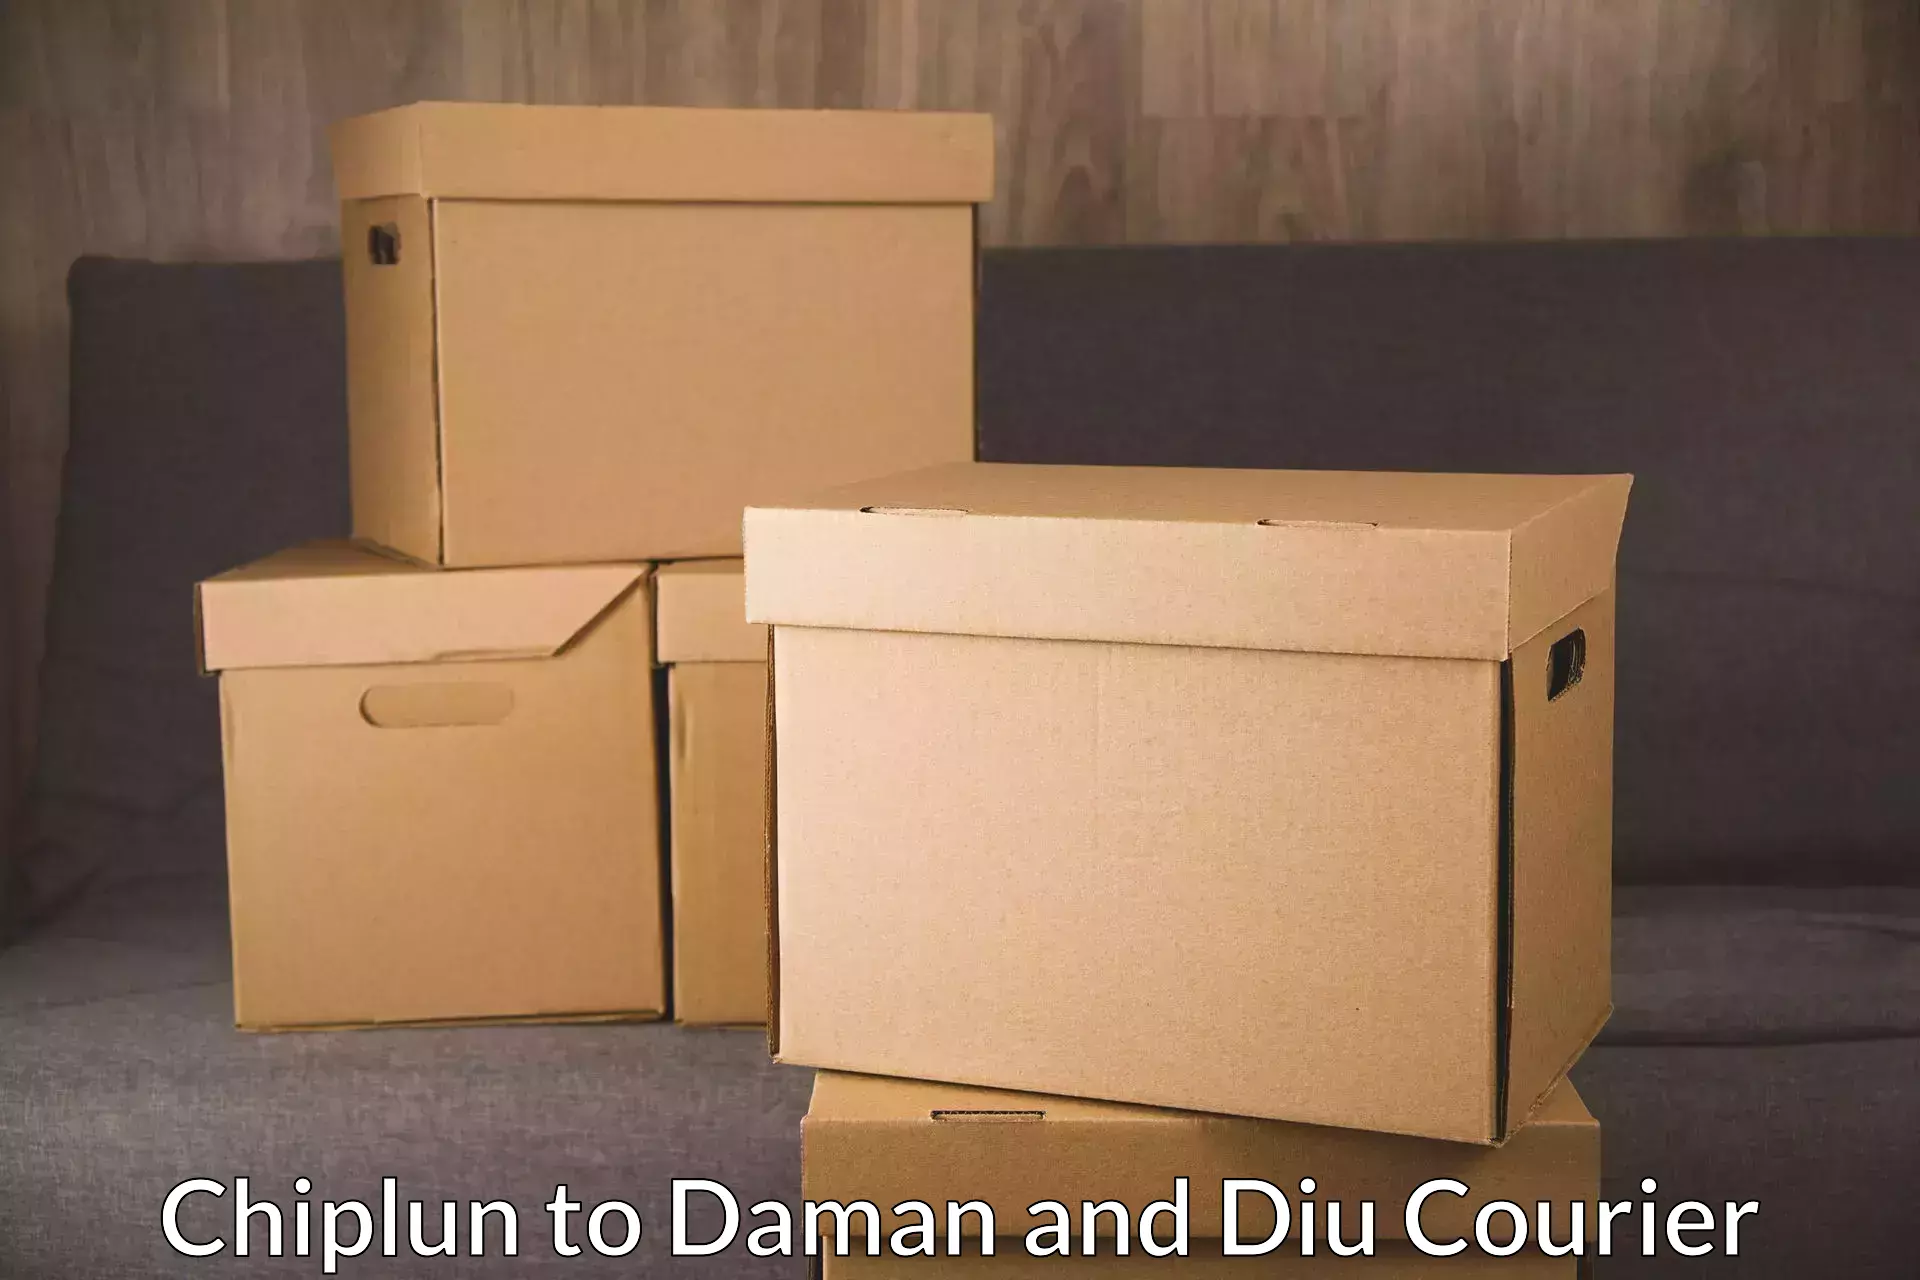 International courier networks Chiplun to Diu